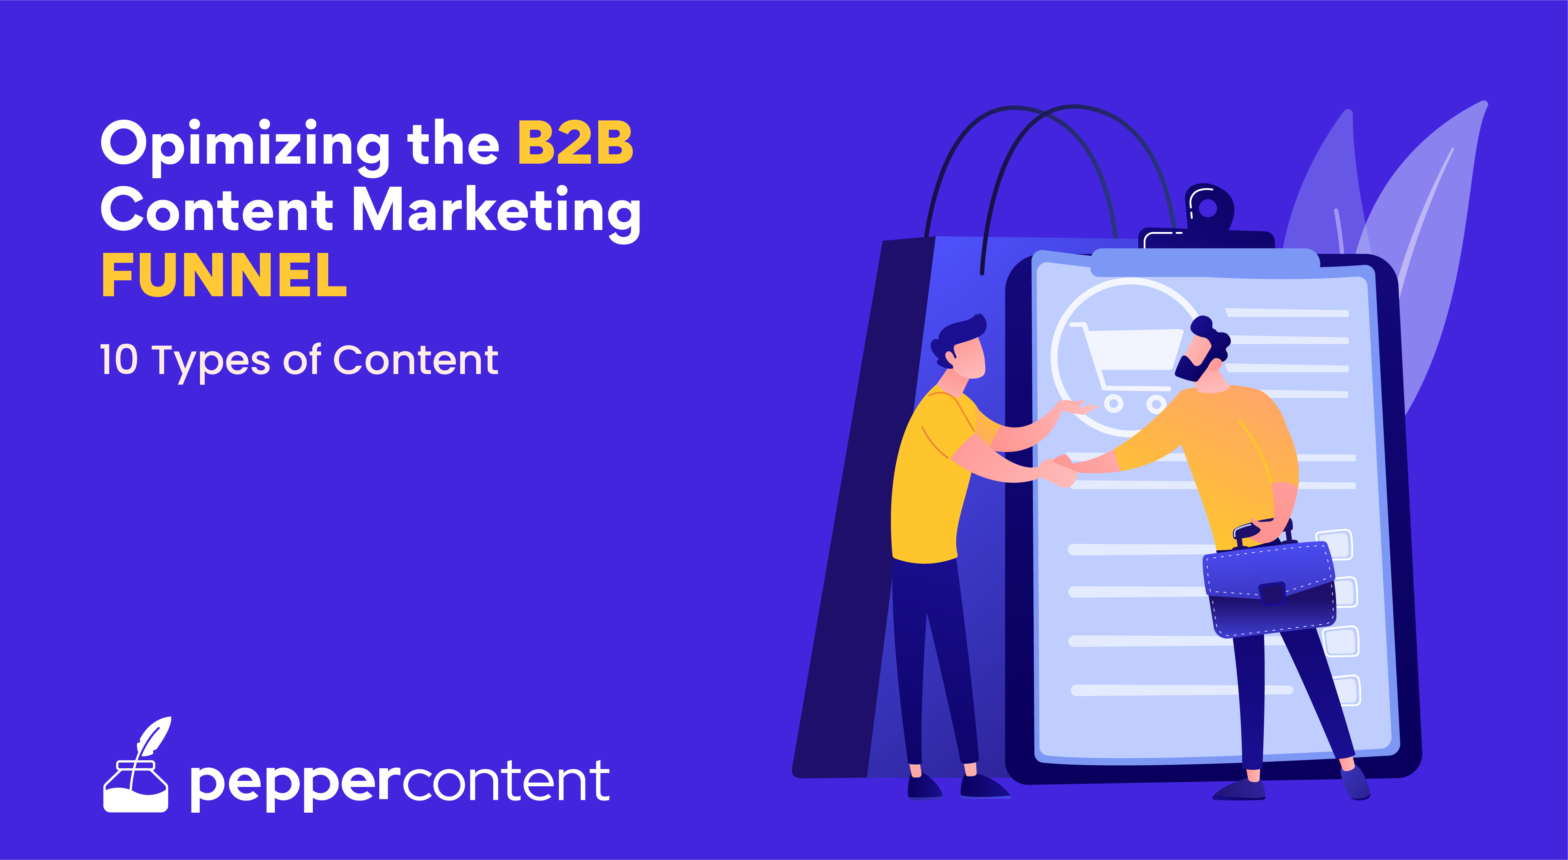 10 Types of Content to Optimize Your B2B Marketing Funnel